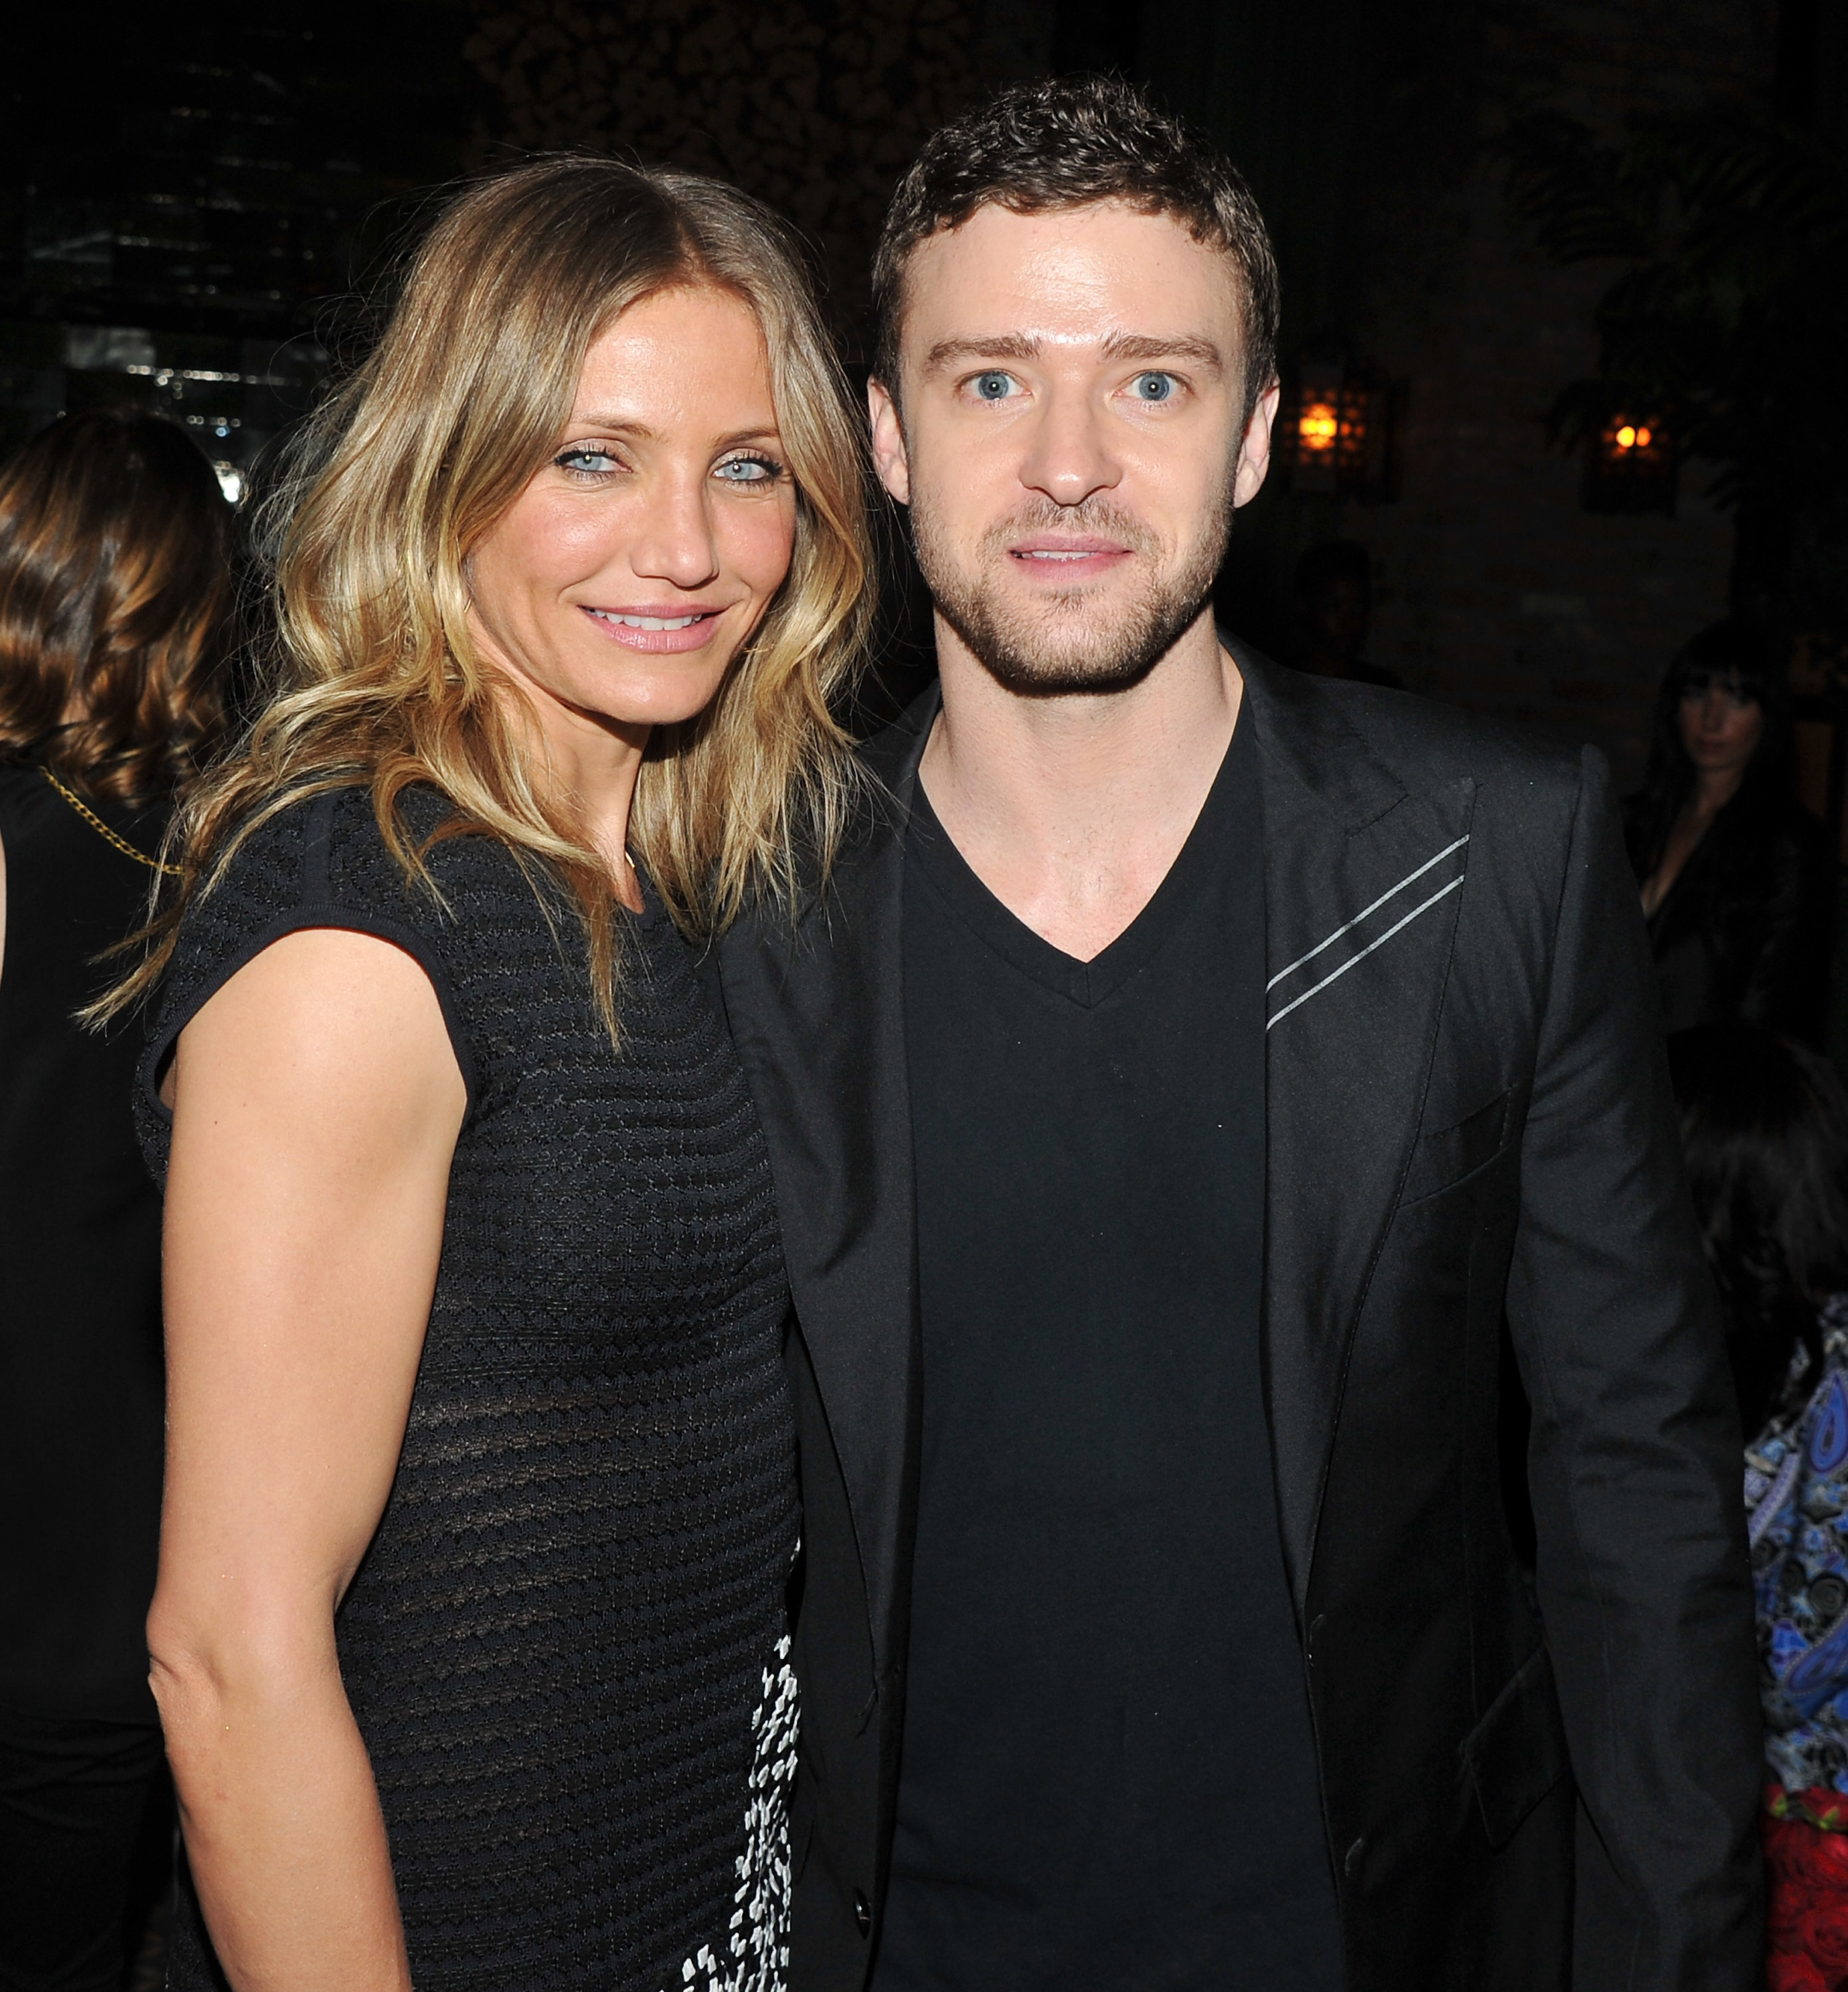 Cameron Diaz and Justin Timberlake during the after-party for the premiere of "Bad Teacher" in New York City on June 20, 2011 | Source: Getty Images